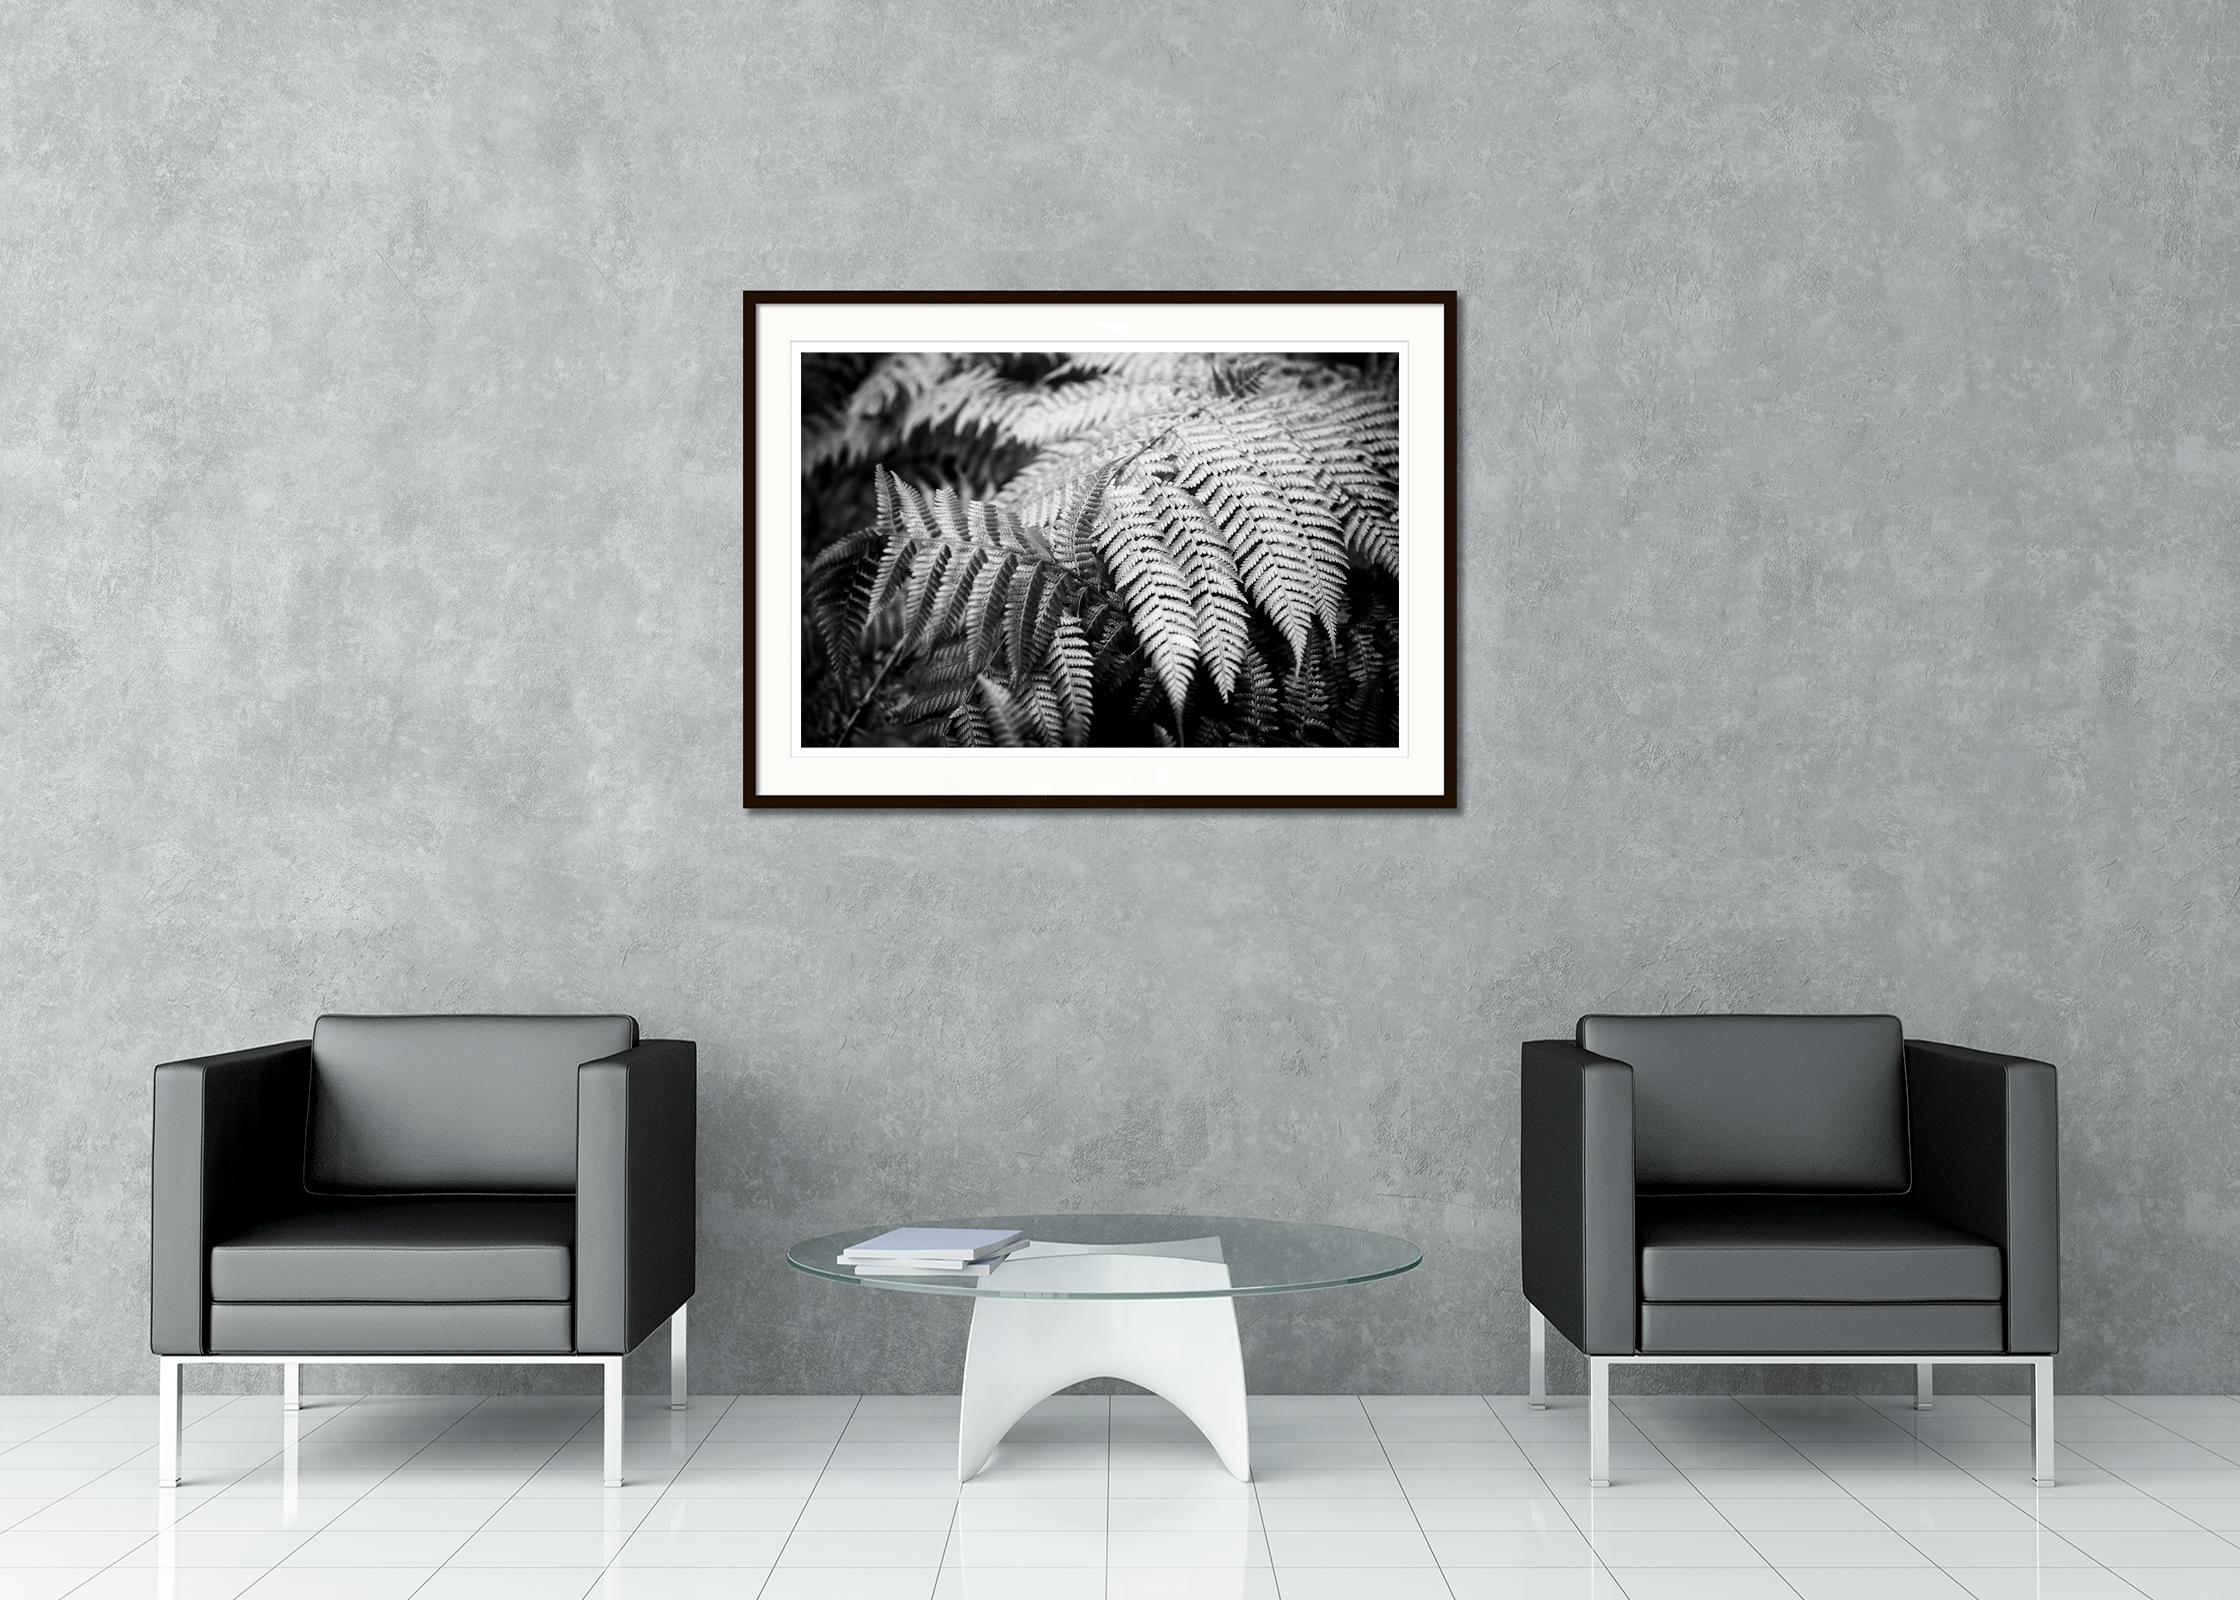 Black and white fine art landscape photography. Polypodiopsida, plant detail, La Gomera, Spain. Archival pigment ink print, edition of 8. Signed, titled, dated and numbered by artist. Certificate of authenticity included. Printed with 4cm white